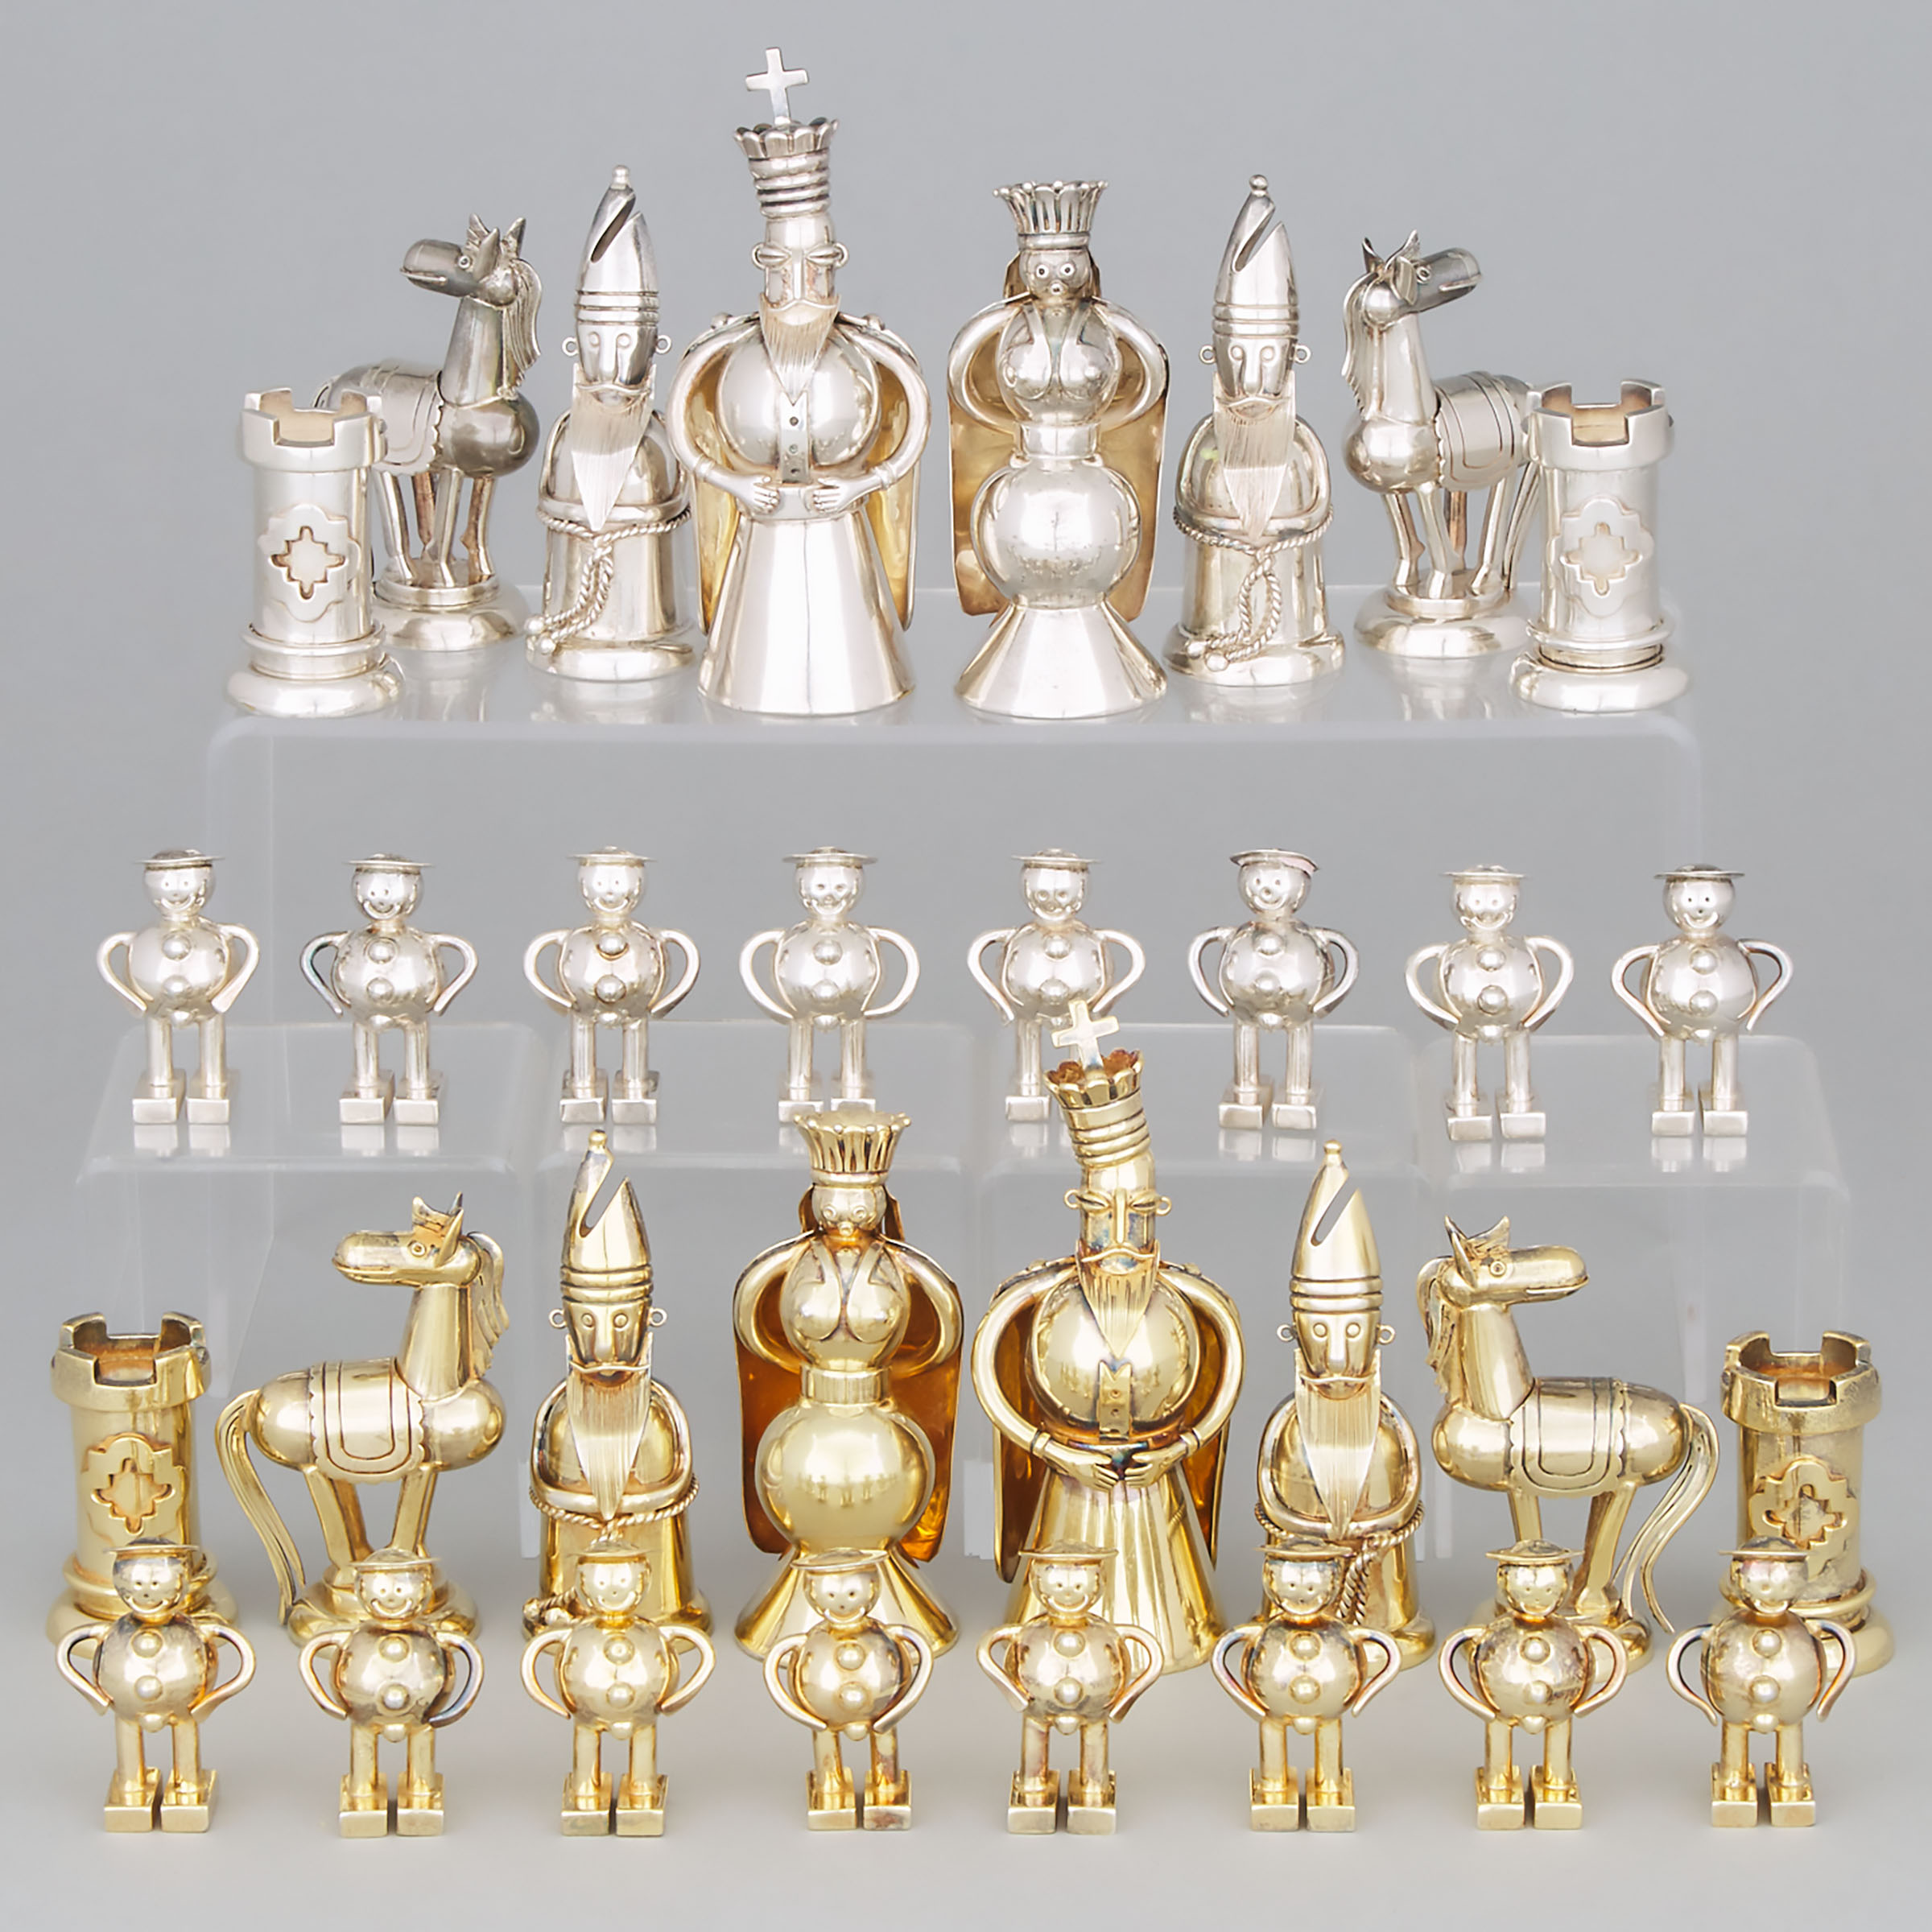 Mexican Silver and Silver-Gilt Chess Set, Héctor Aguilar, Taxco, 20th century